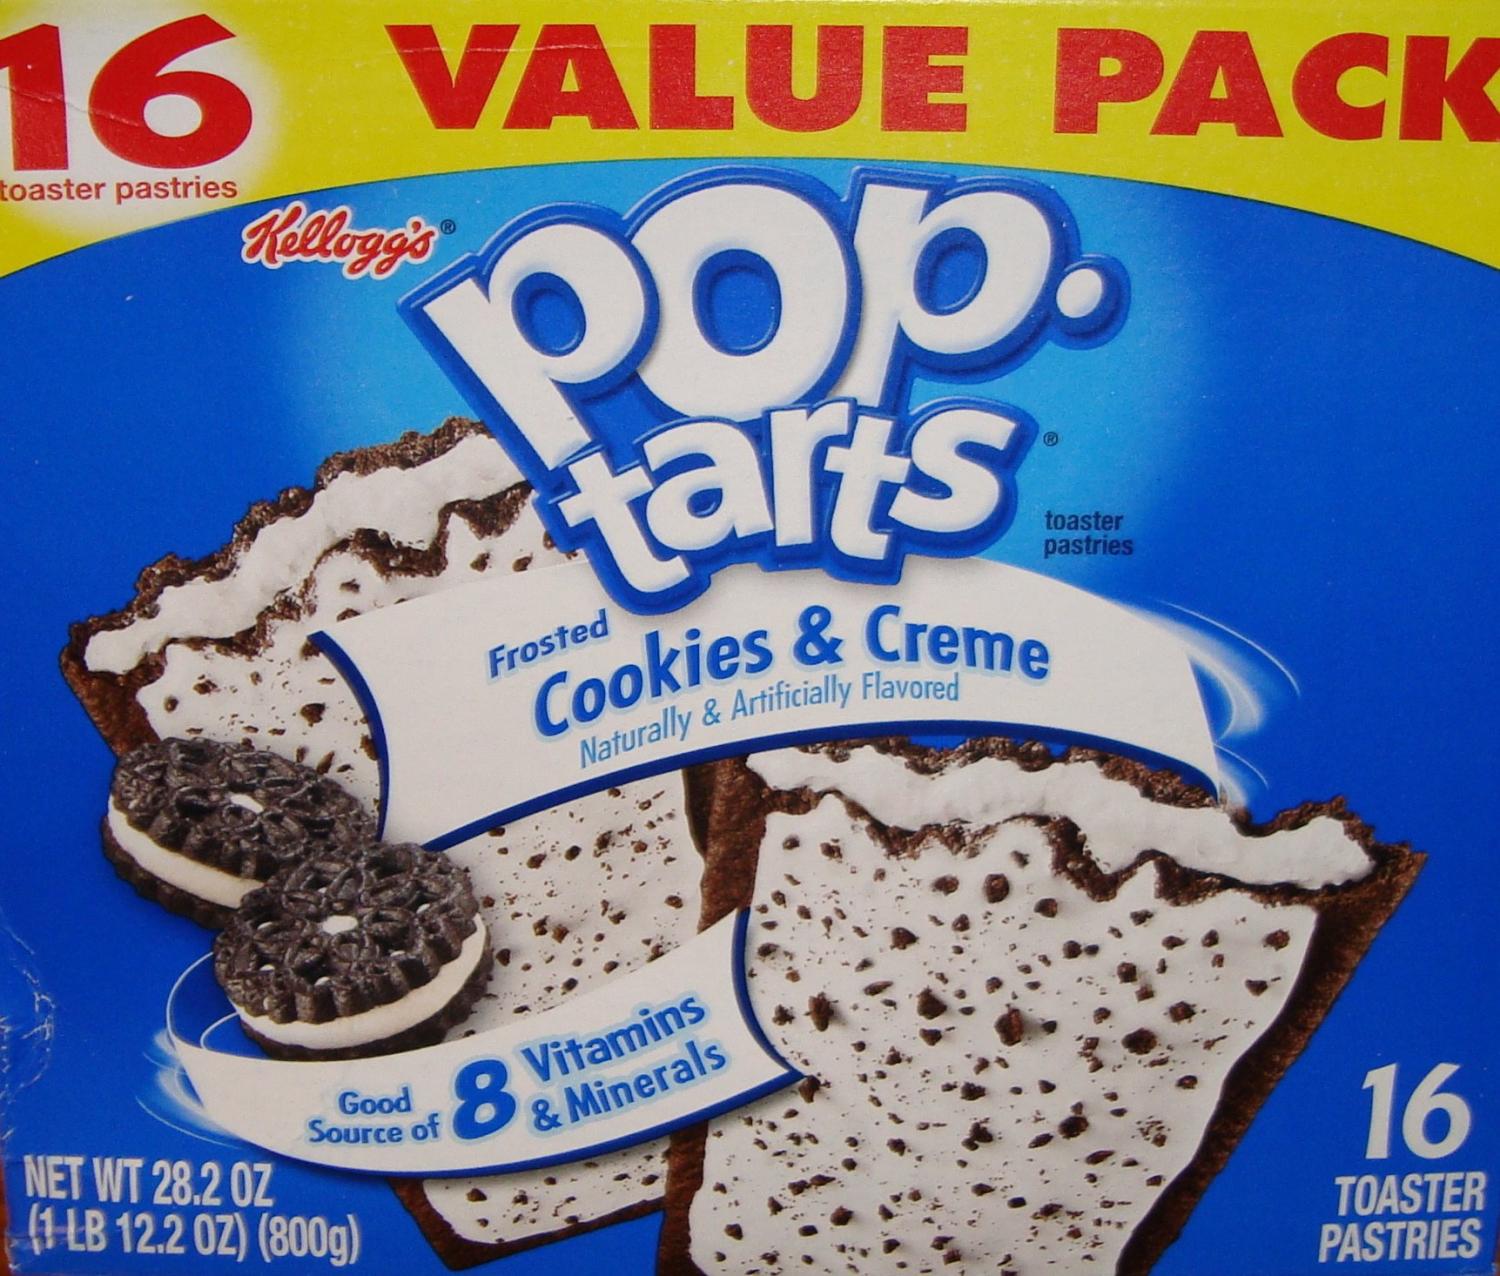 Pop Tarts Toaster Pastries Cookies and Creme